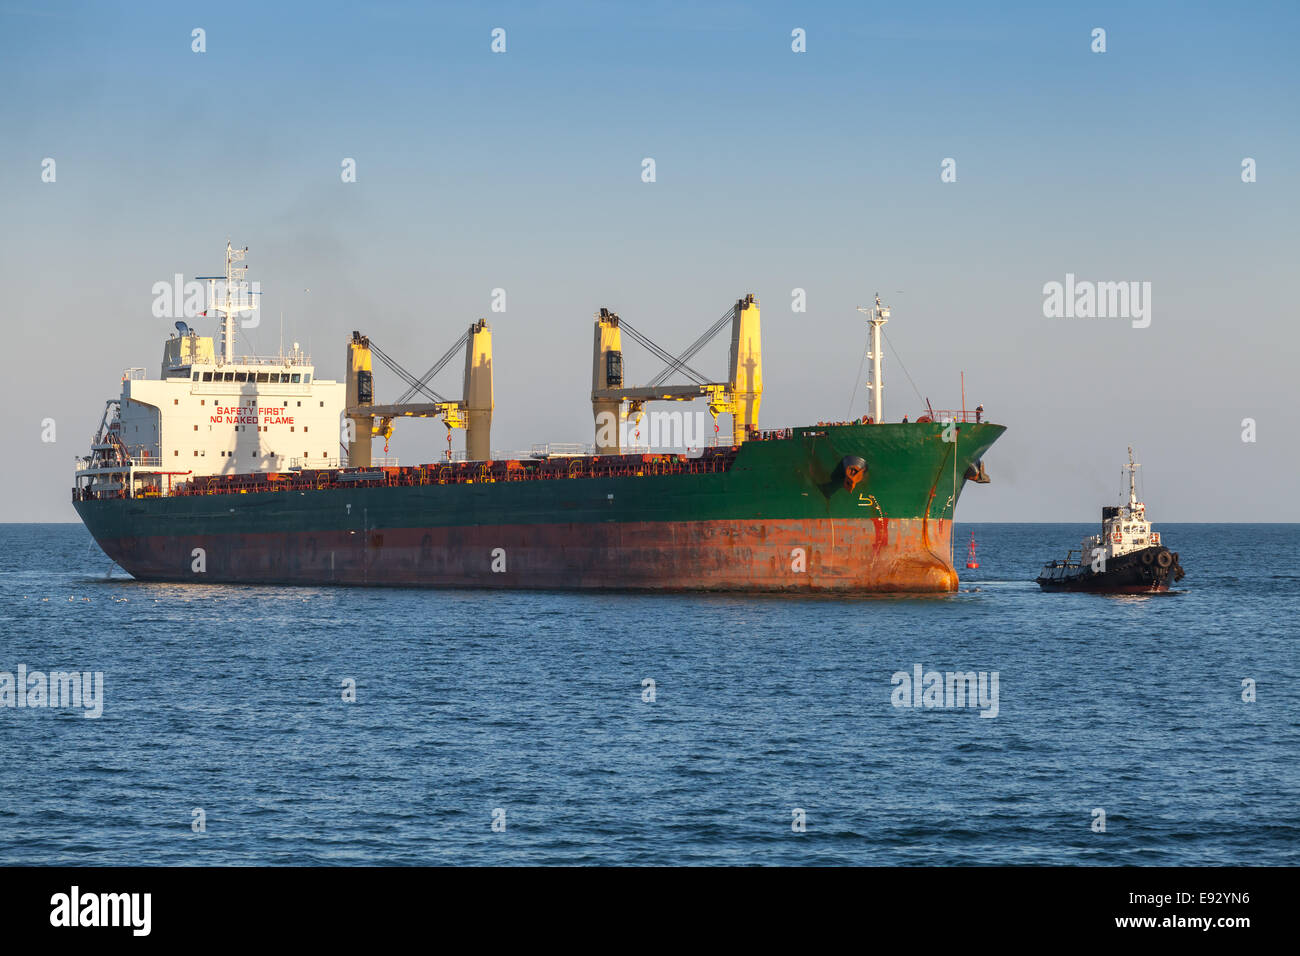 Bulk carrier and small tug boat in the Black Sea Stock Photo